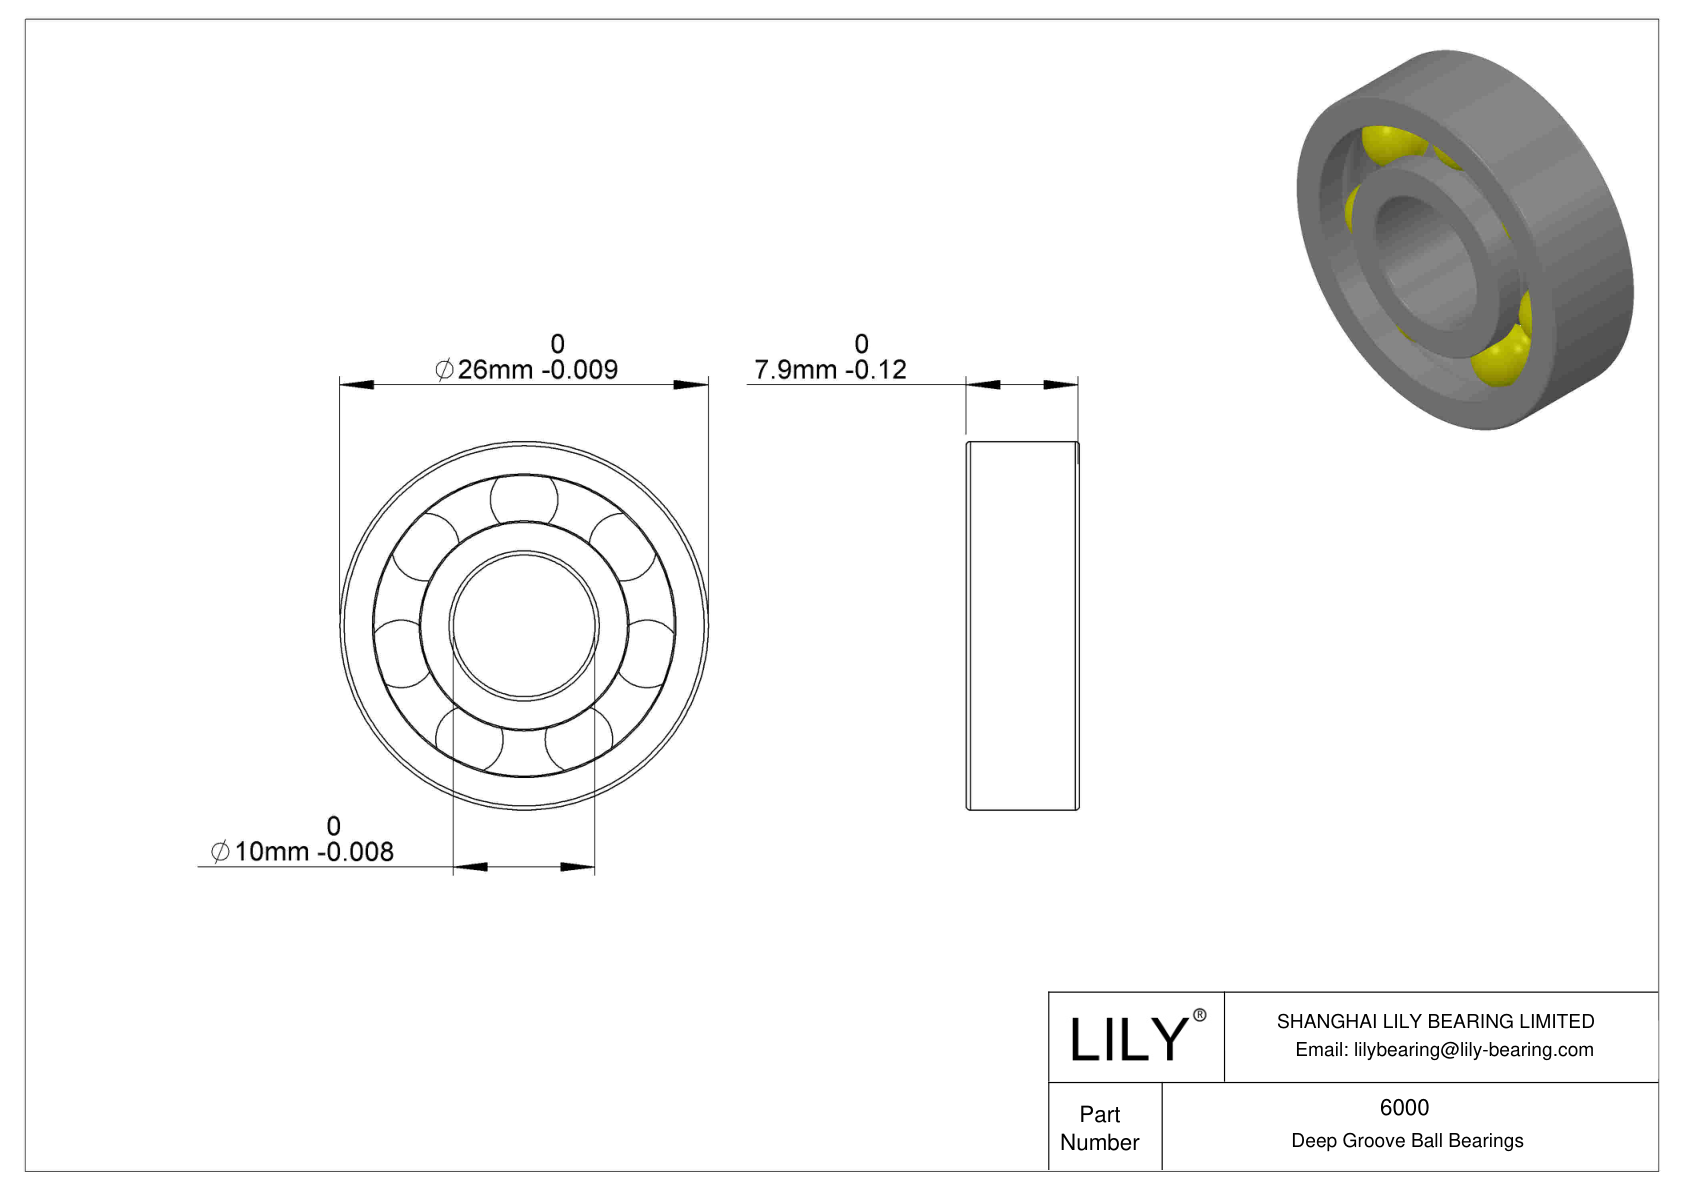 LILY-PU600038-10C1L10M8 Polyurethane Coated Bearing With Screw cad drawing